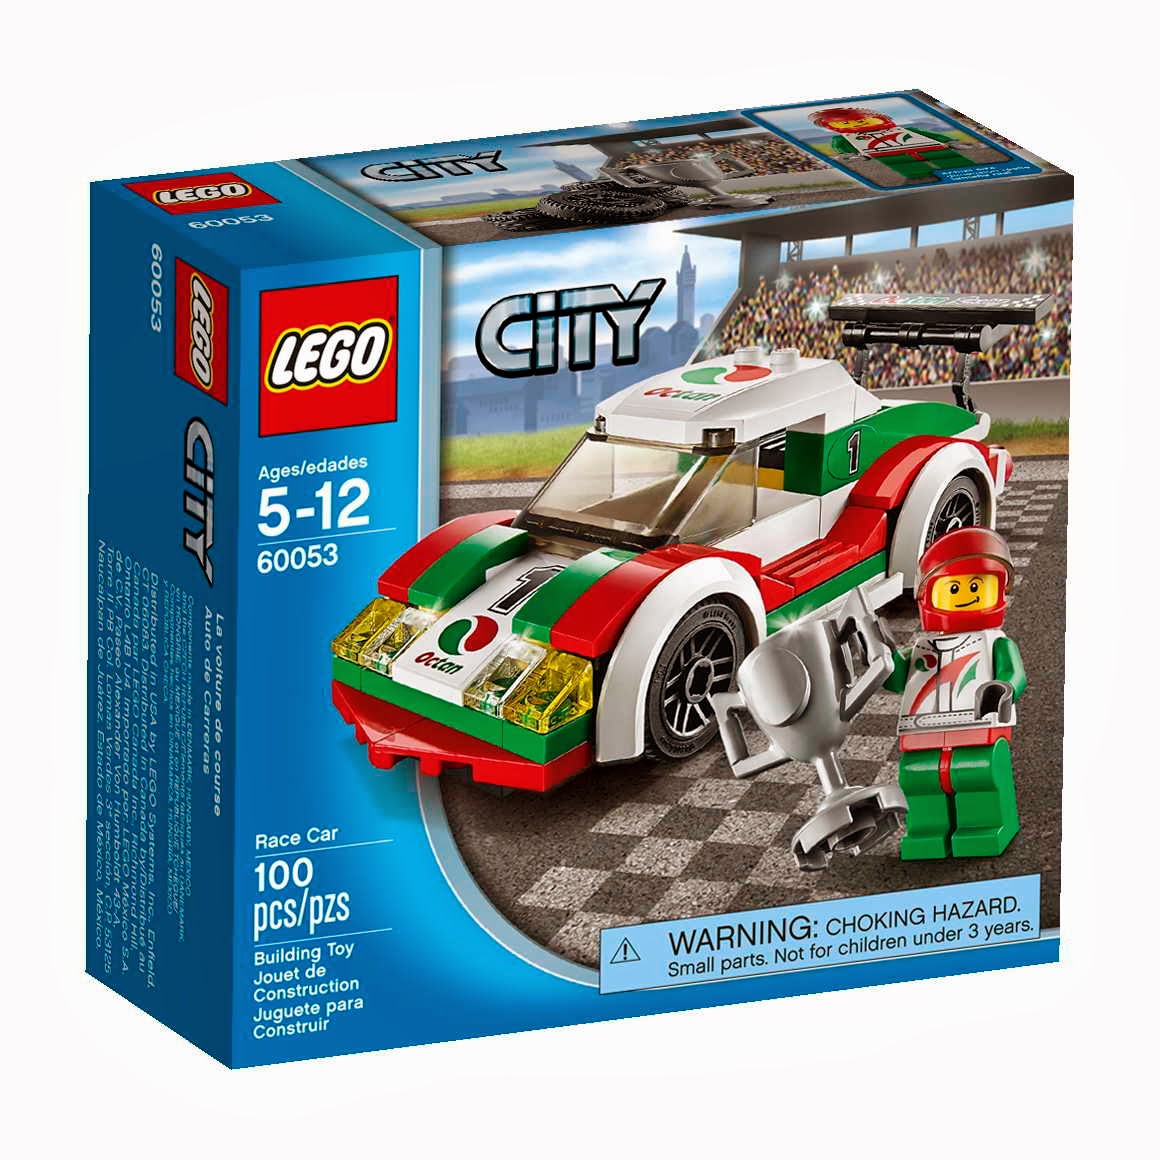 LEGO gosSIP 111113 LEGO 60053 Race Car box art and picture